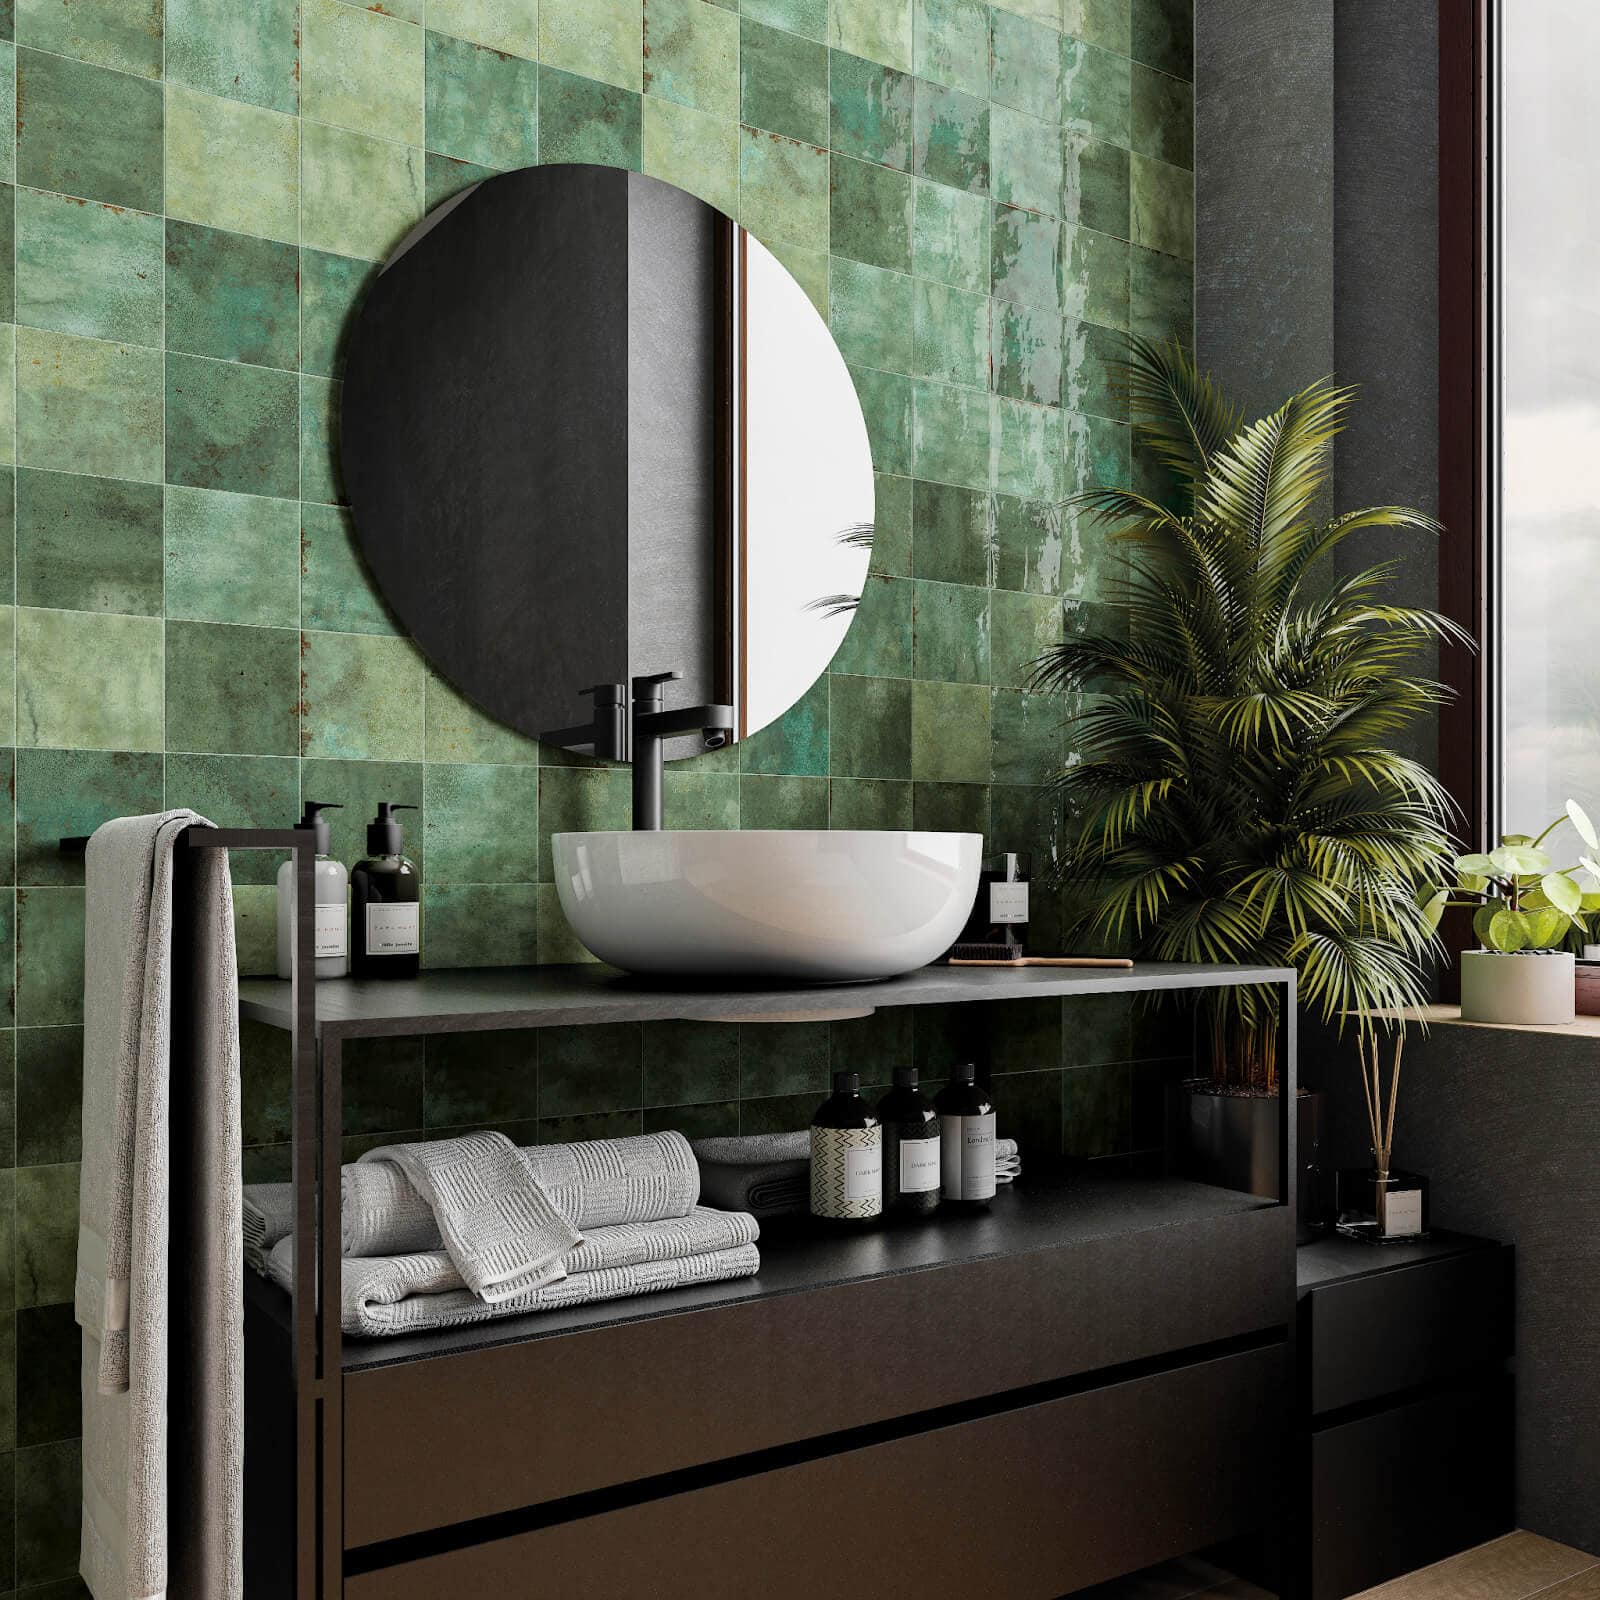 Bathroom with green tile grid in a variegated look
